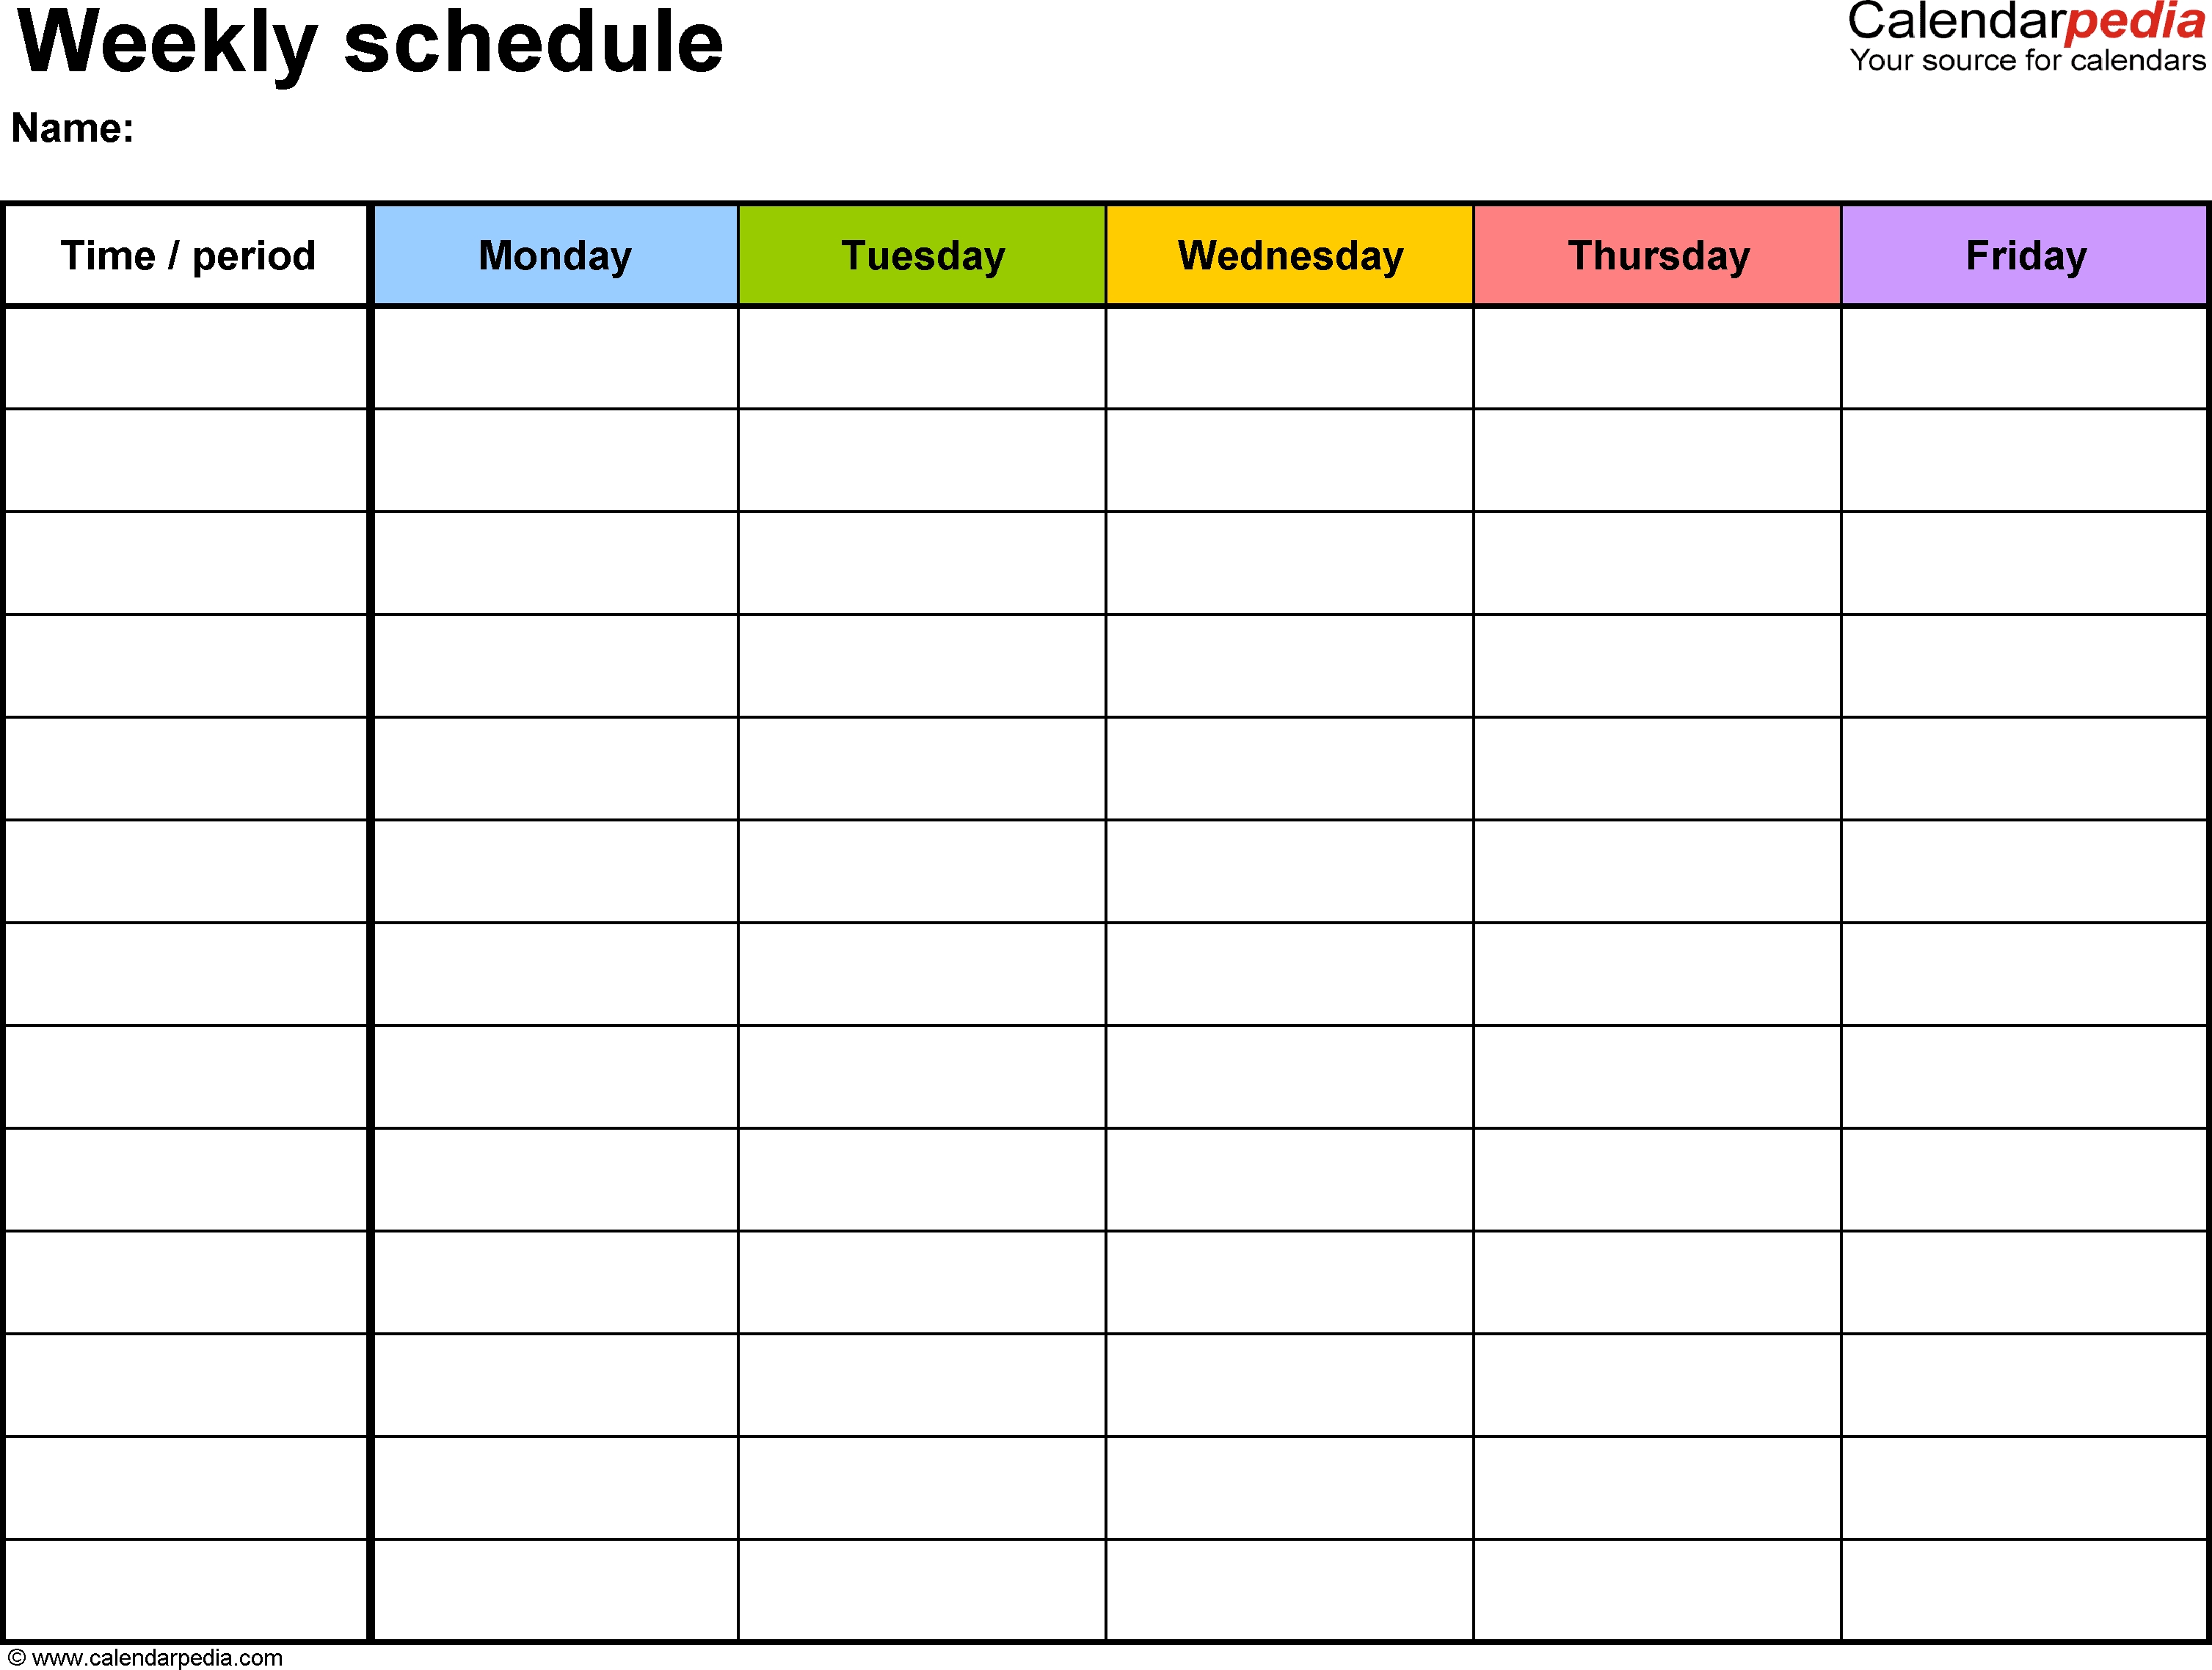 Free Weekly Schedule Templates For Word - 18 Templates Perky Printable Blank Caldendar Monday - Friday